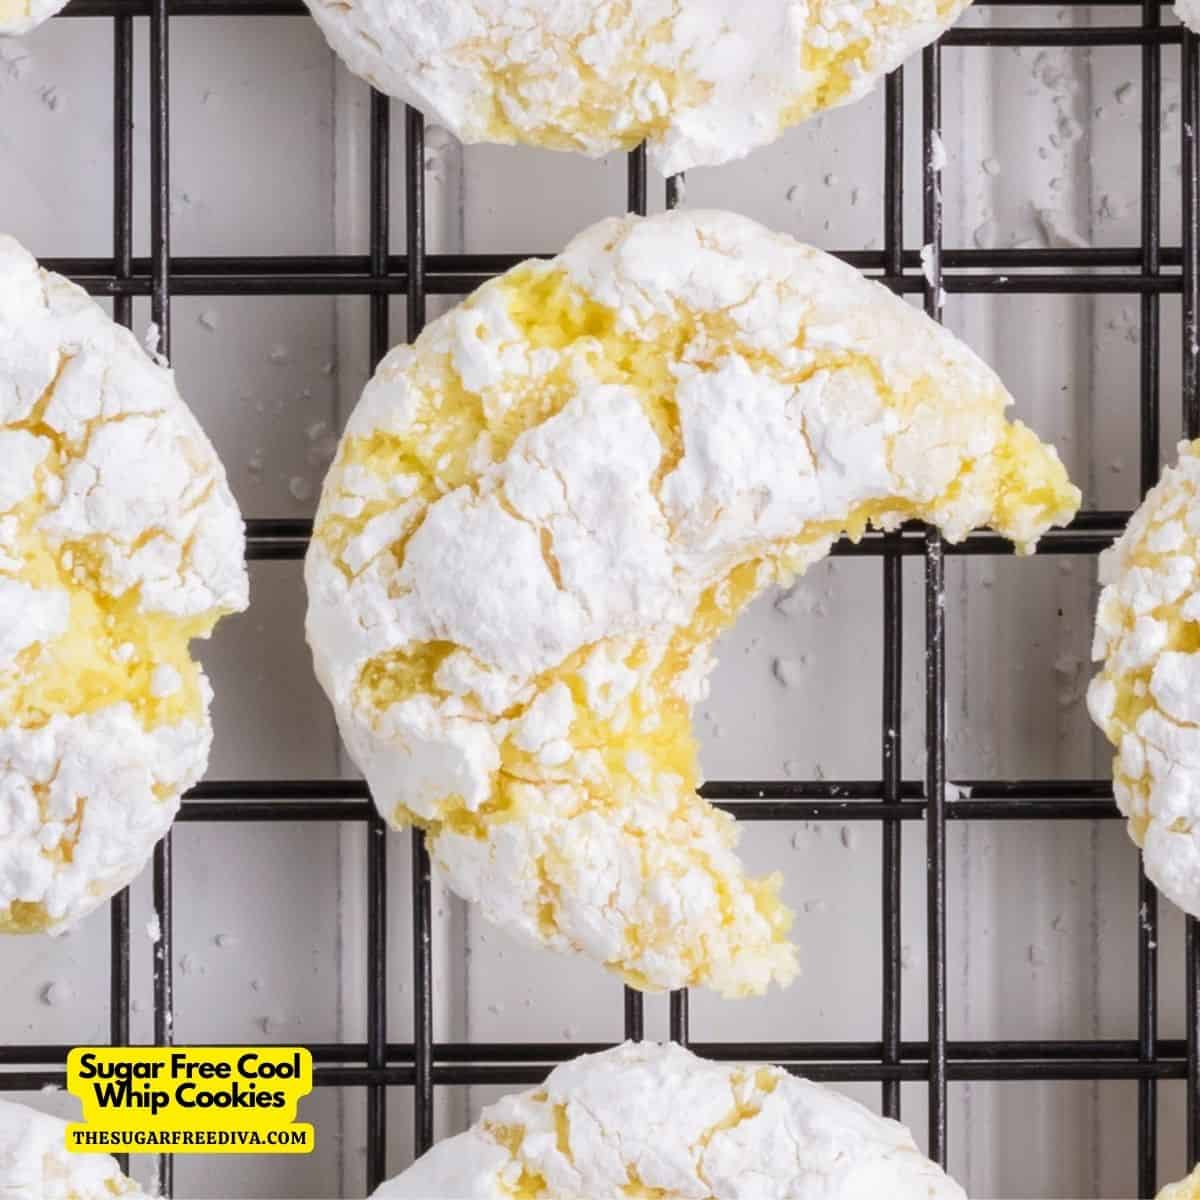 Sugar Free Cool Whip Cookies, a simple and delicious three ingredient dessert recipe that can be made in about 20 minutes.